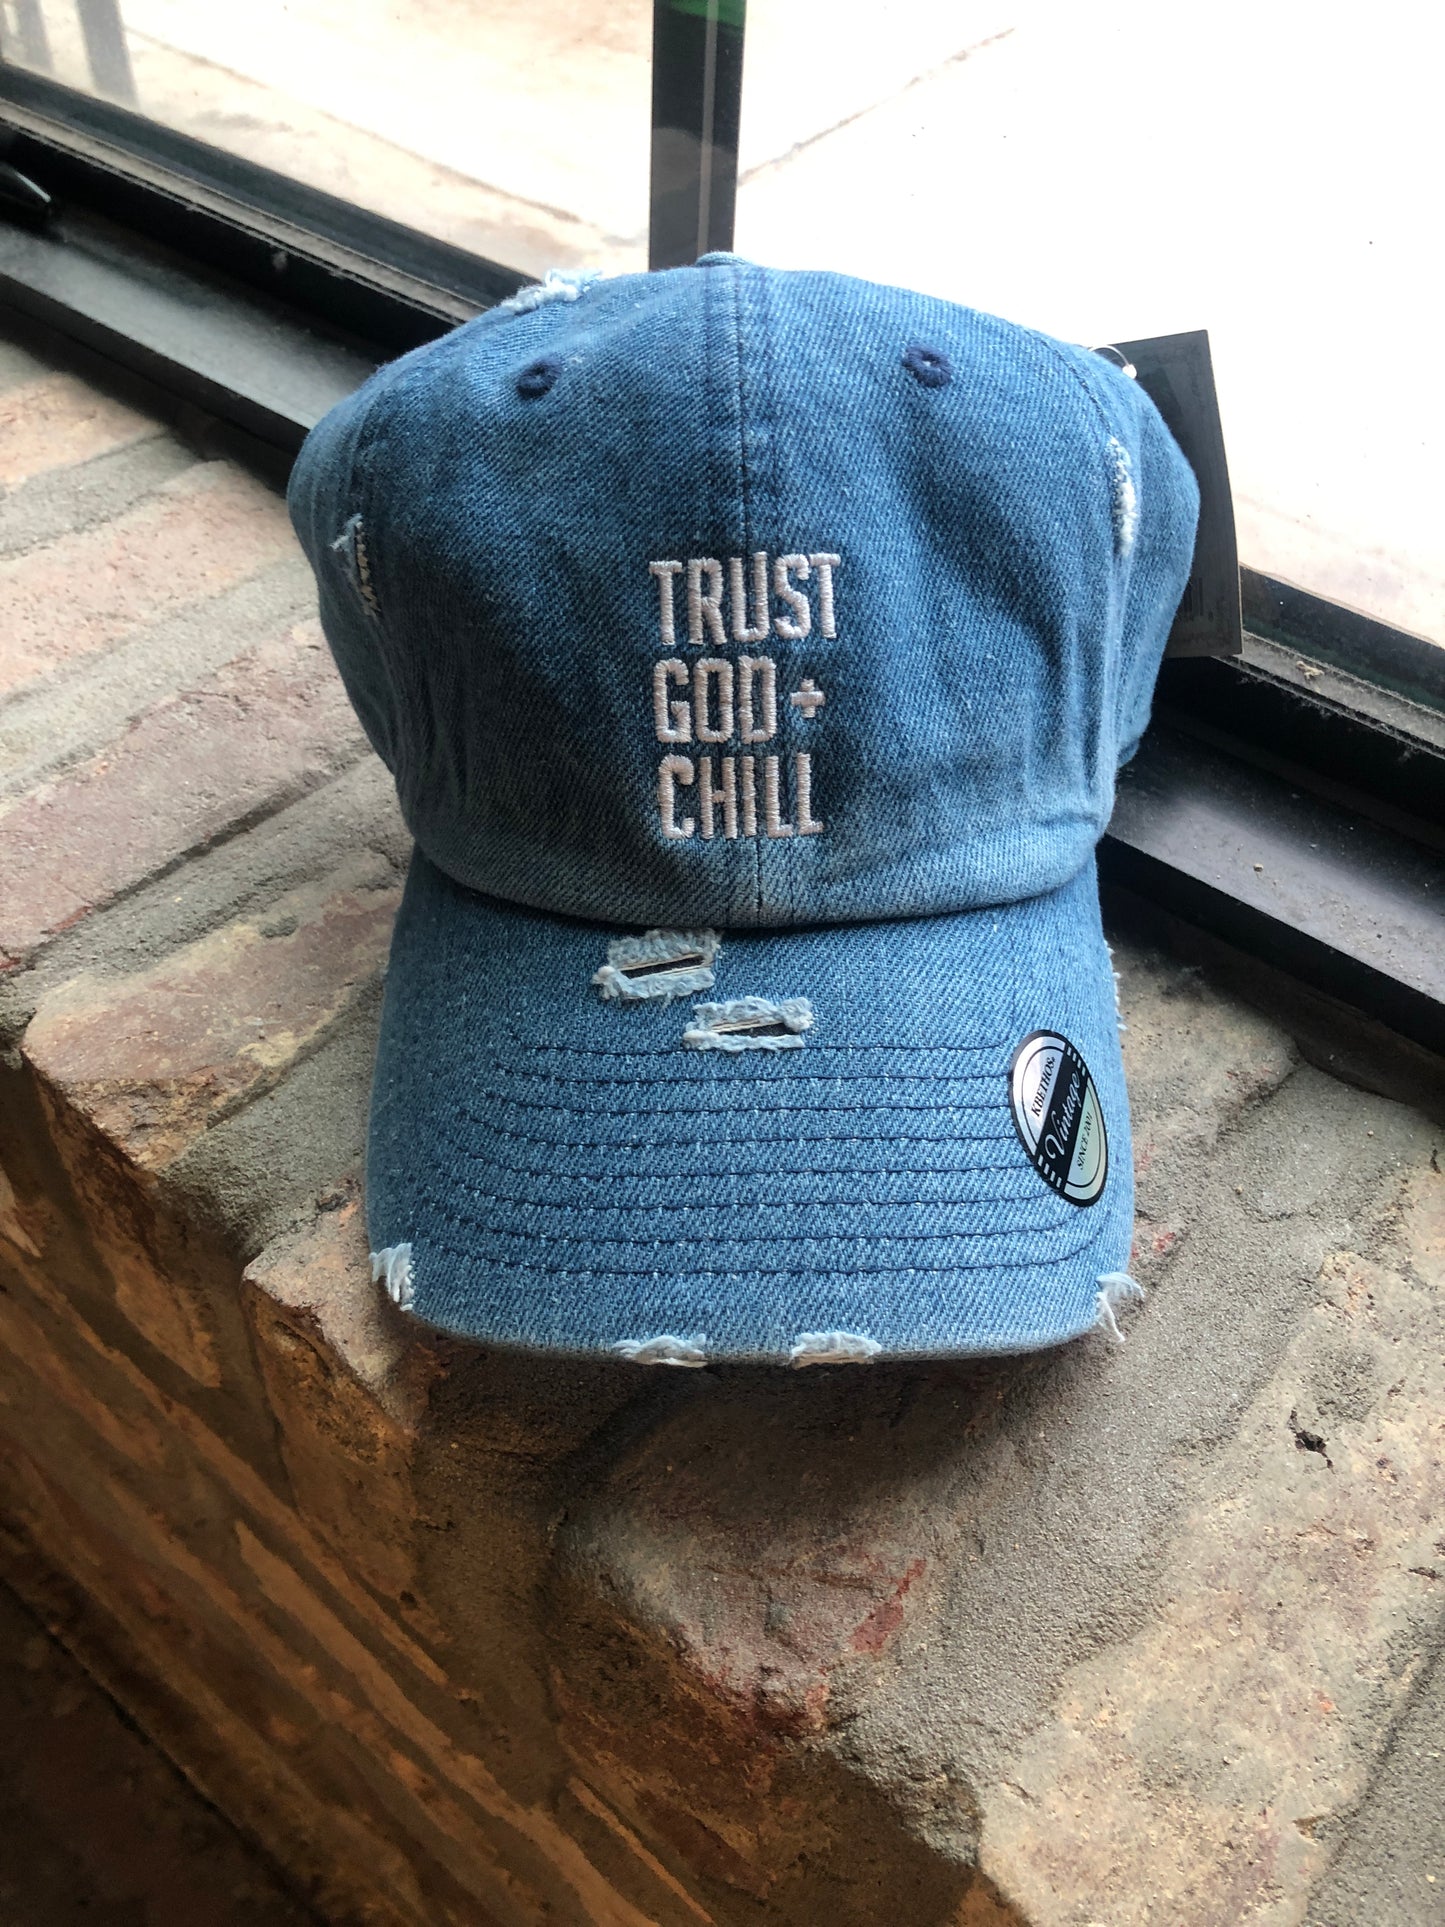 (CLEARANCE) Trust God + Chill Hat (Distressed)